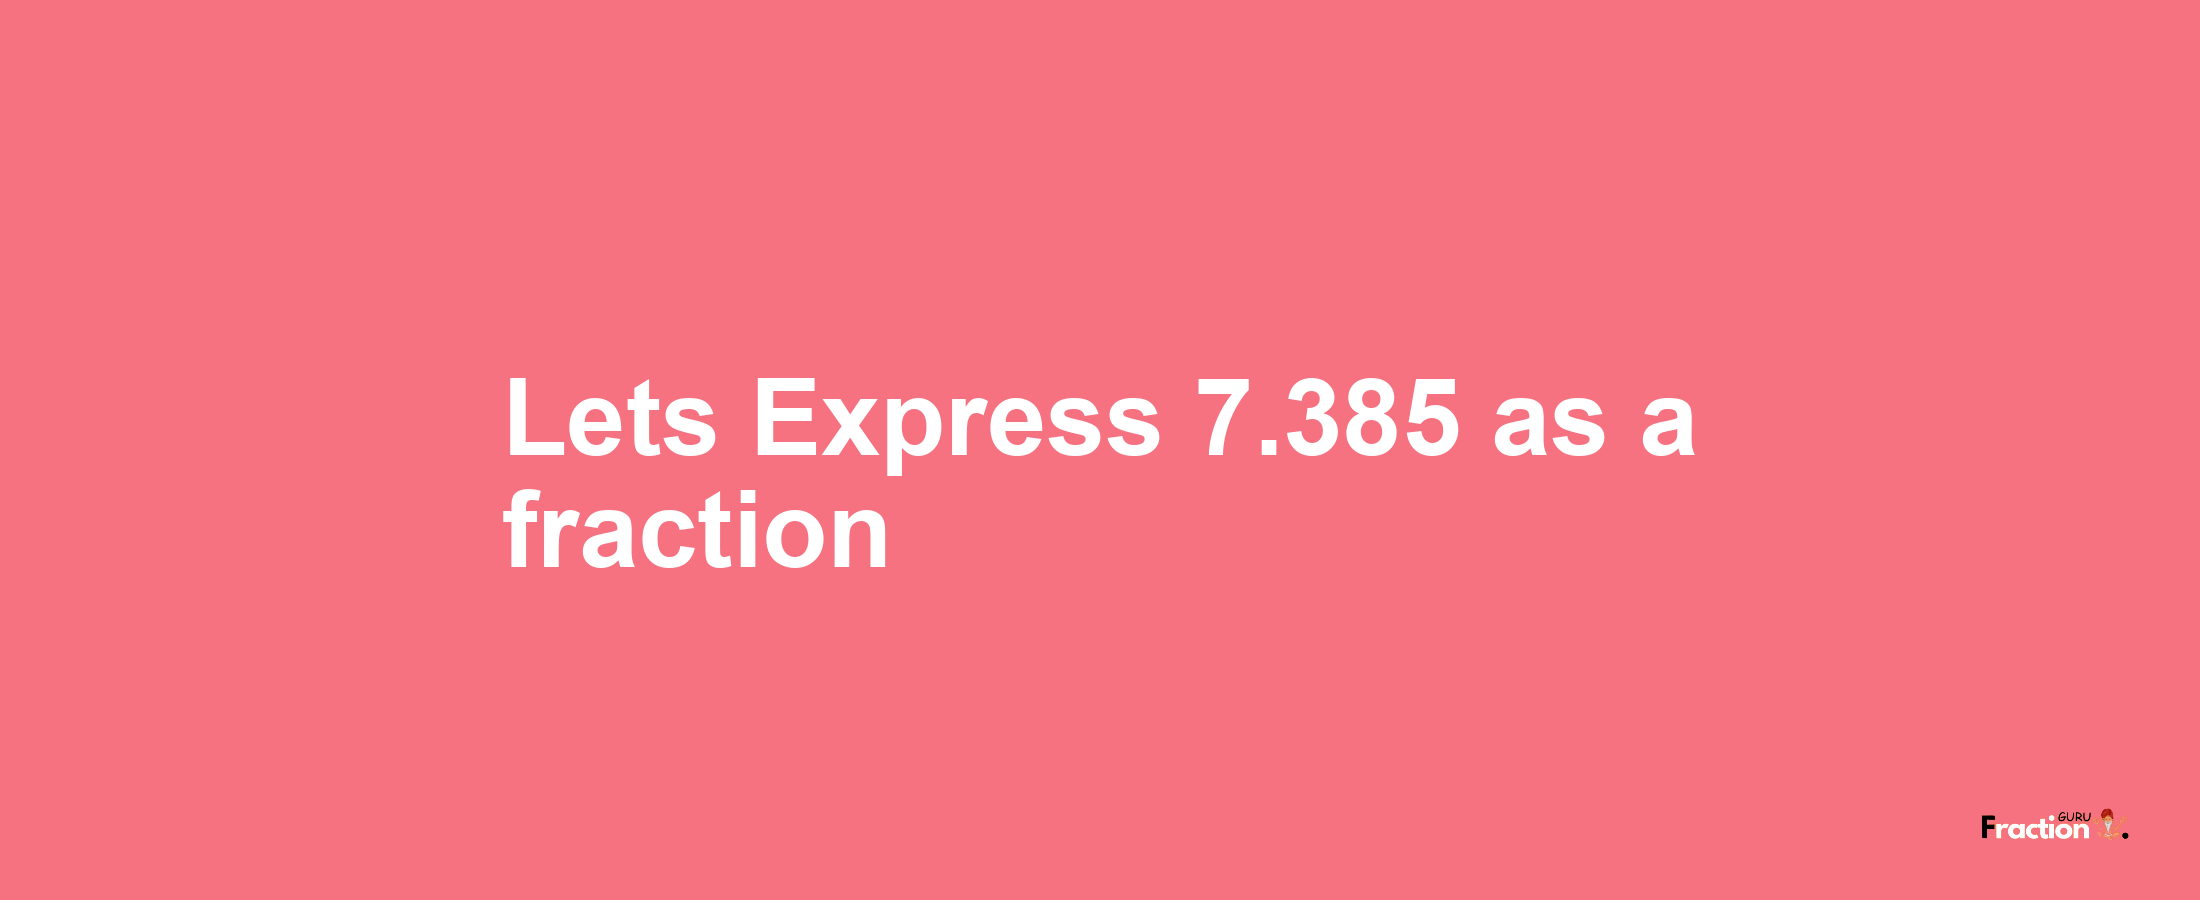 Lets Express 7.385 as afraction